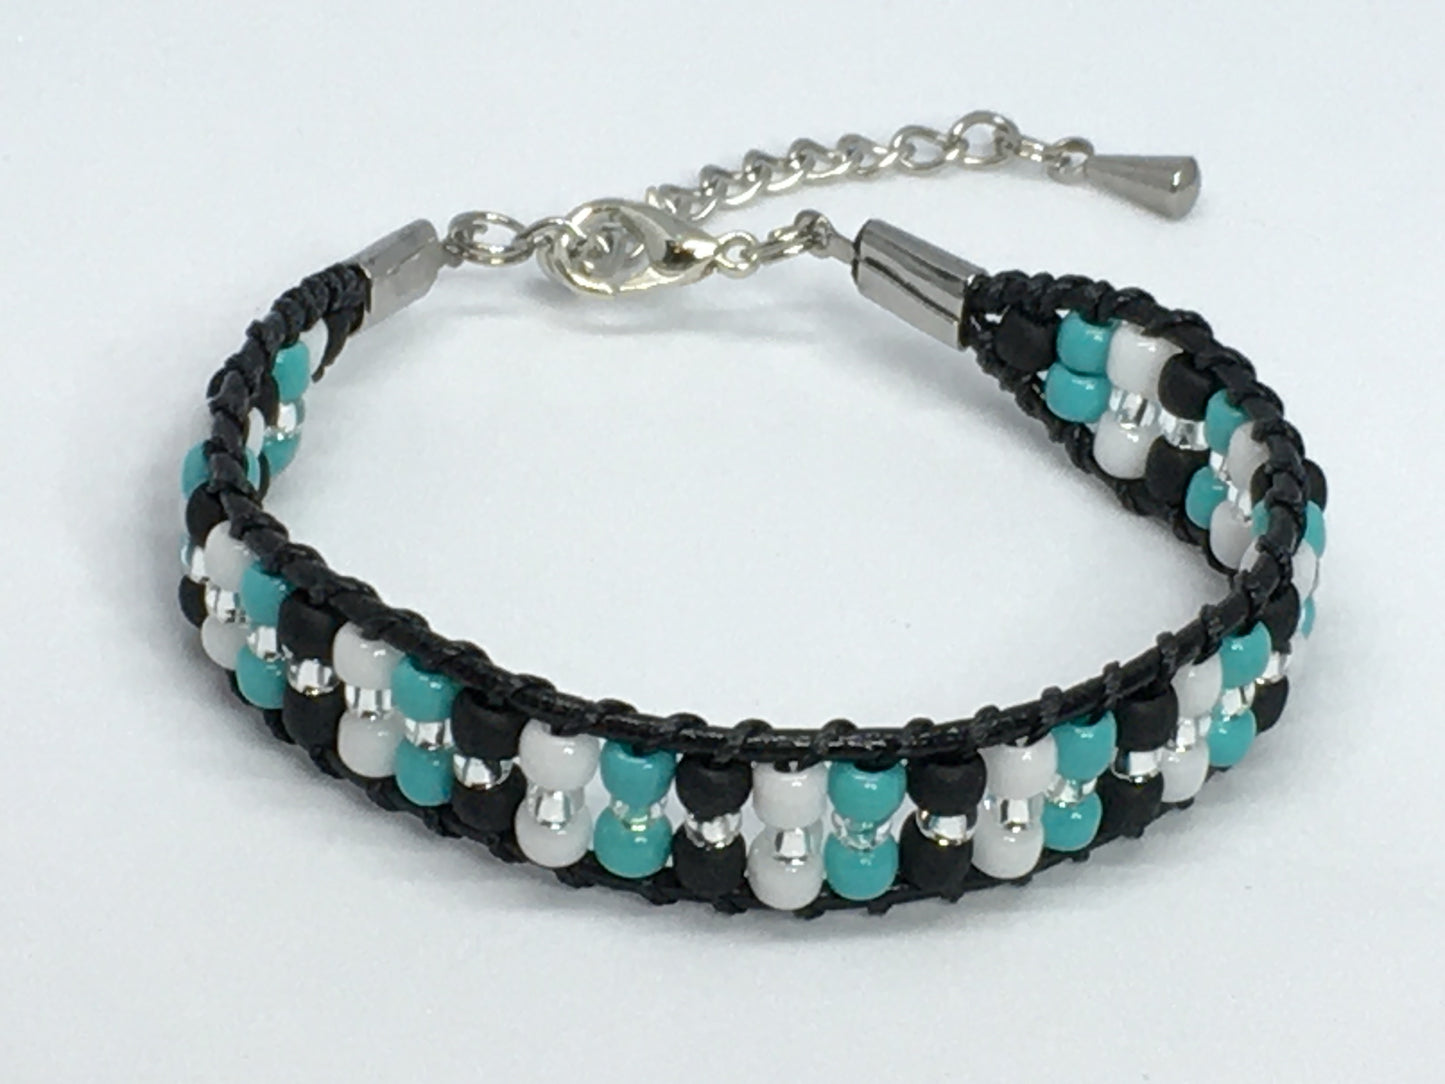 6.75" Bead and Leather Women's Bracelet